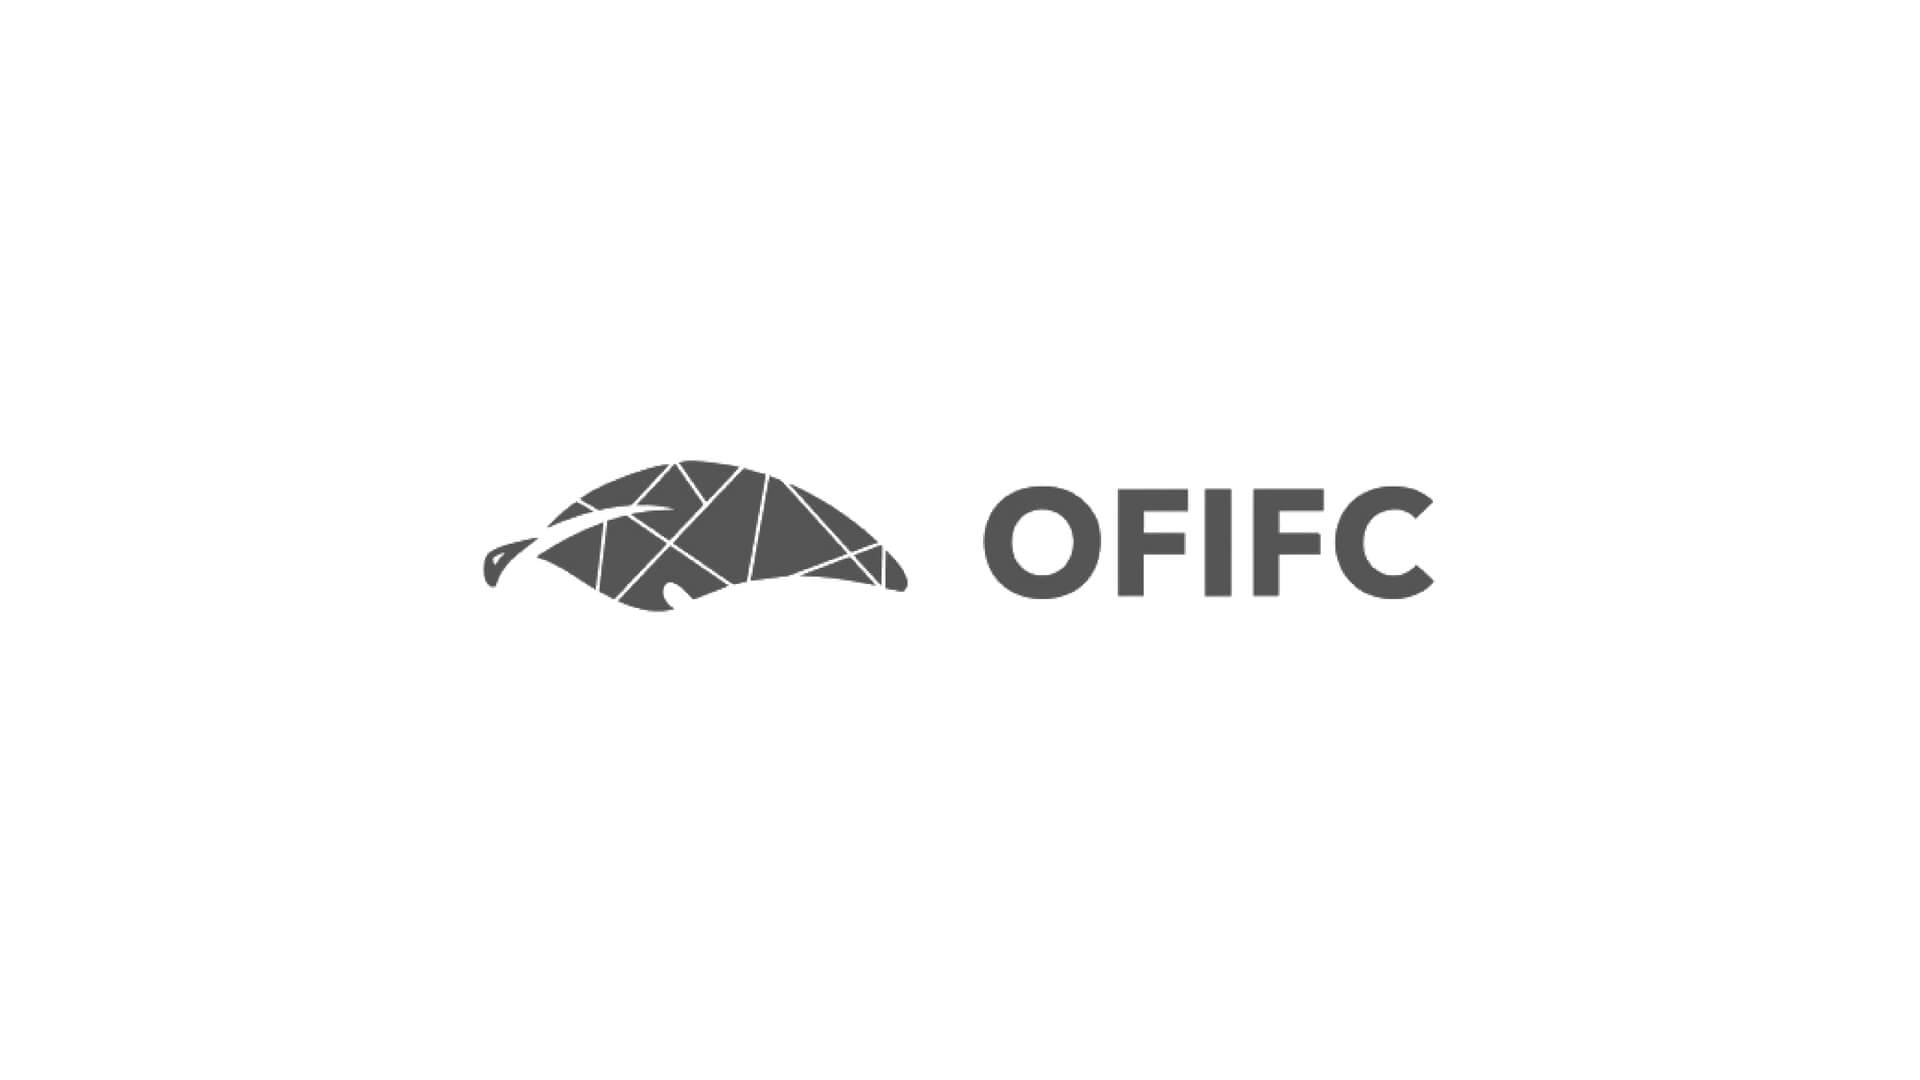 Timmins Care Logo featuring a stylized turtle in a geometric design next to the text "ofifc" in bold, modern font on a plain background. Cochrane District Social Services Administration Board